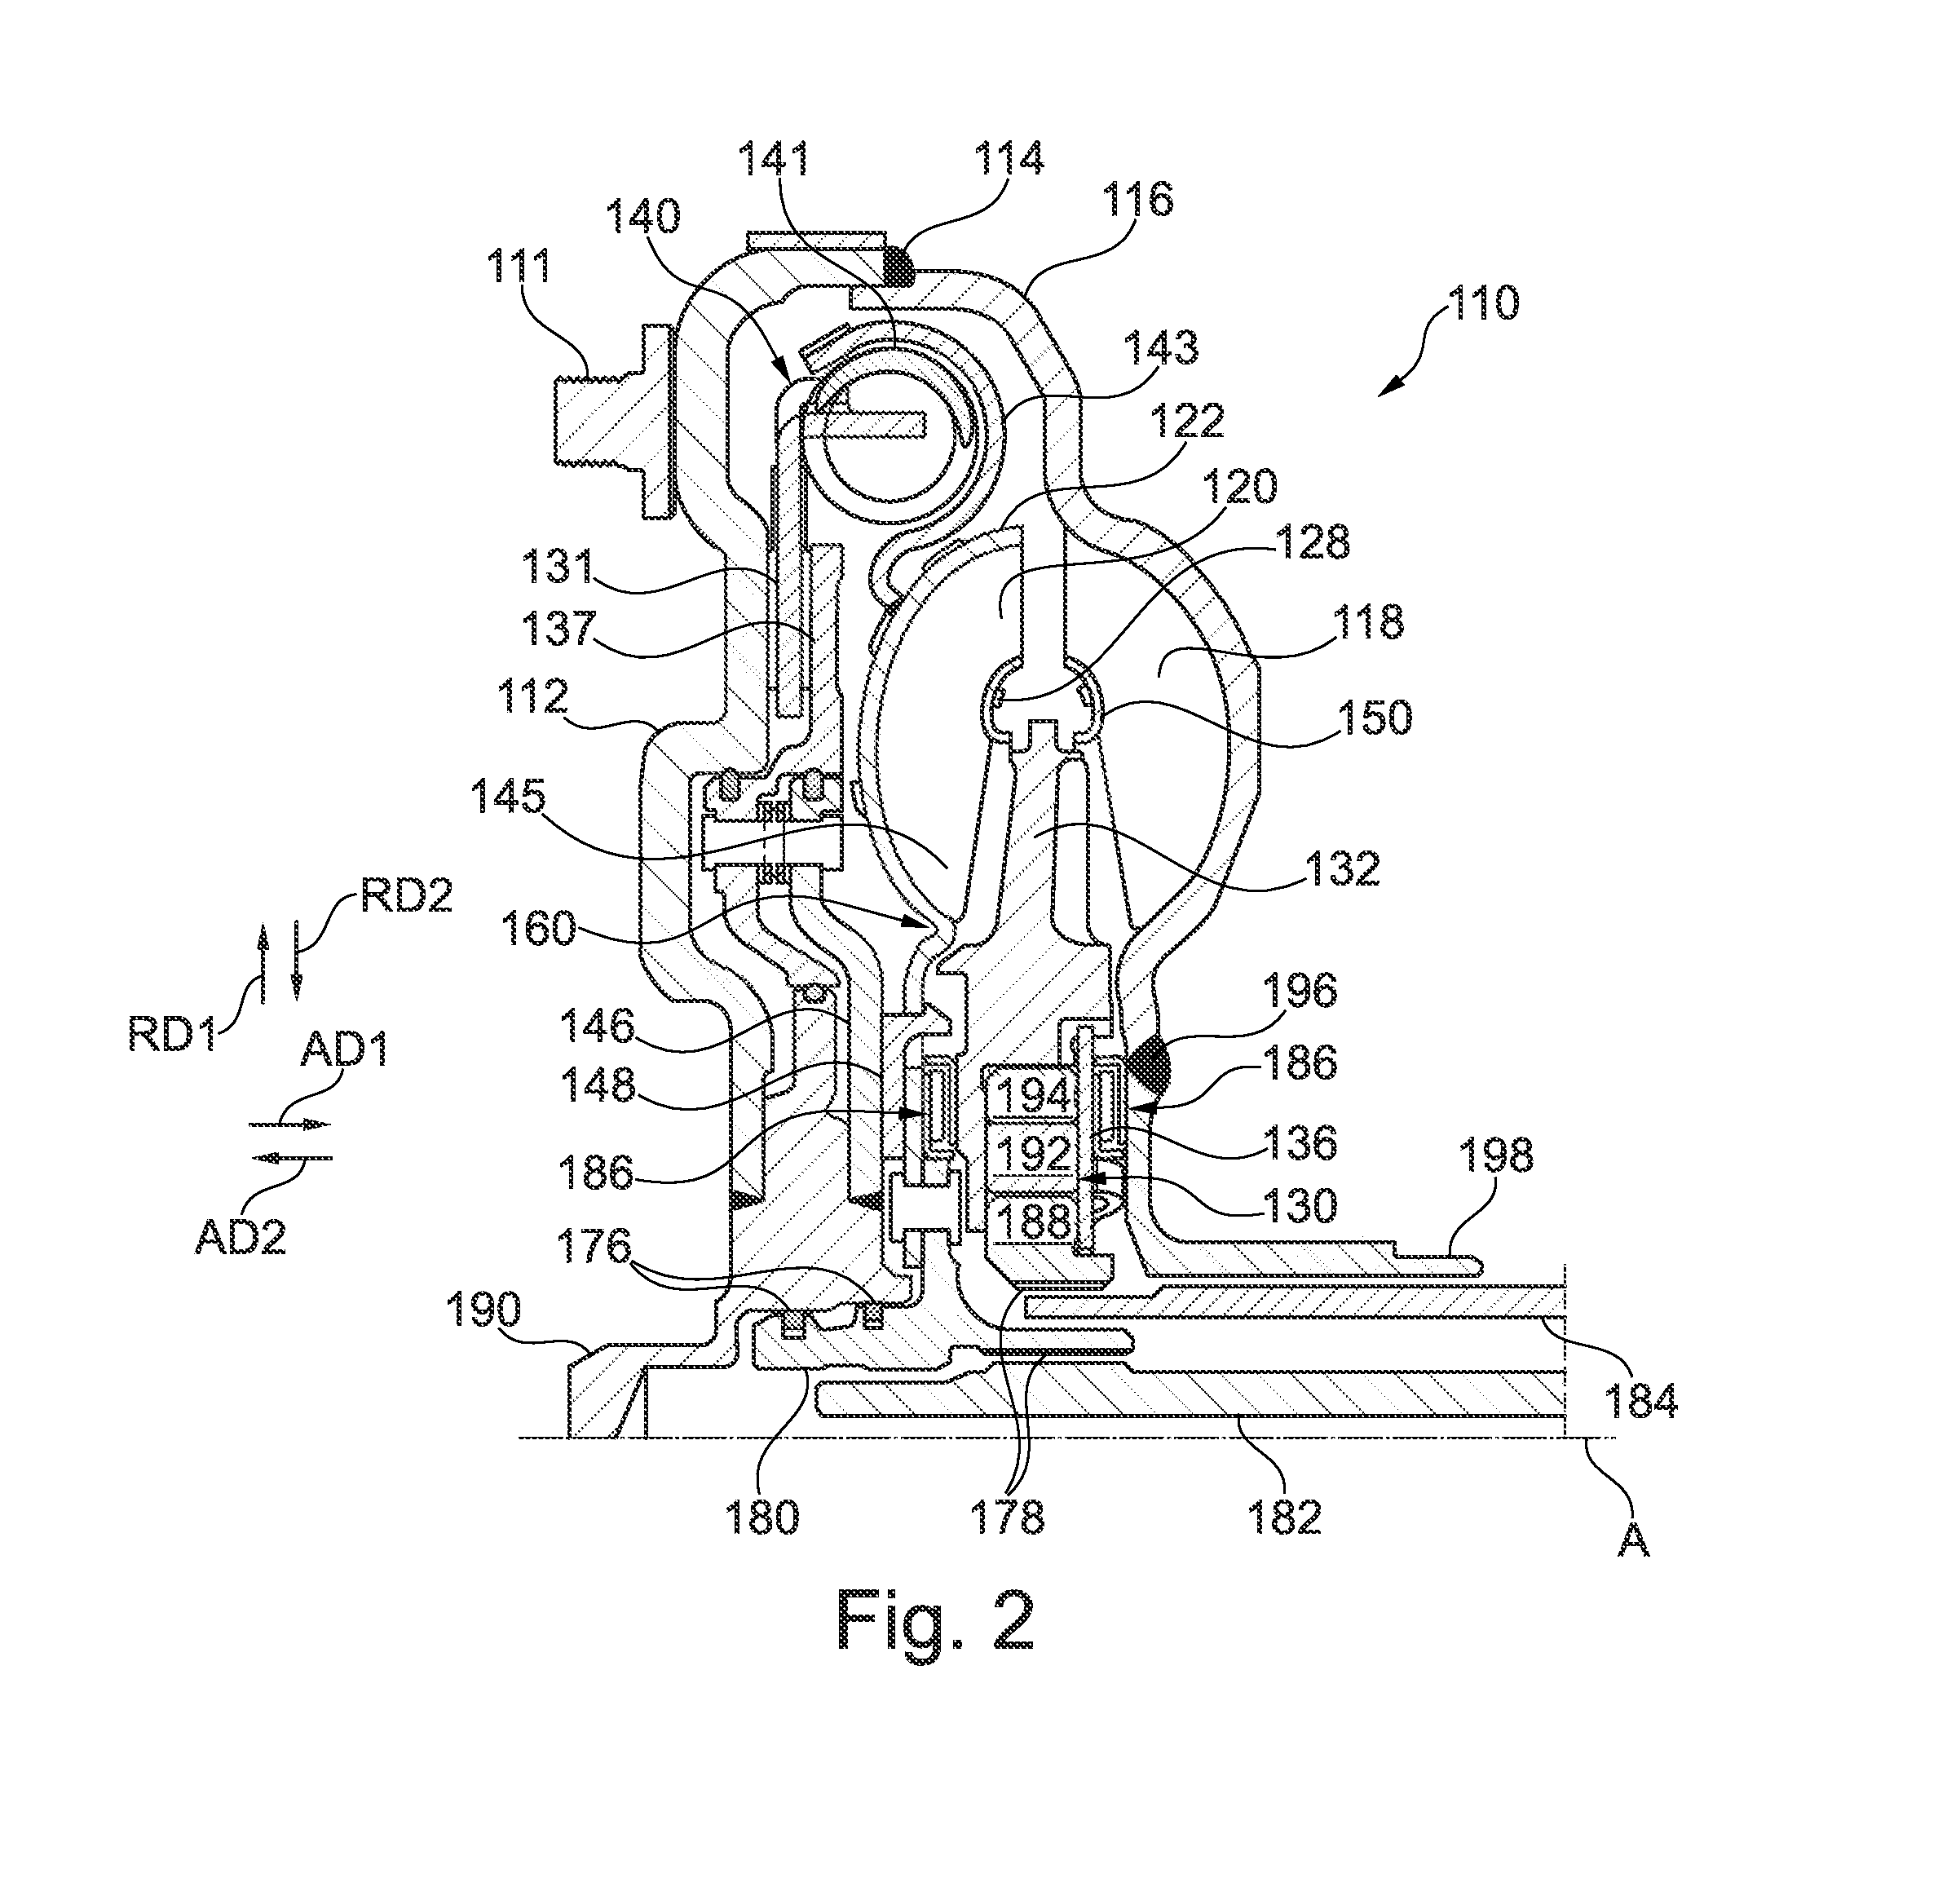 Stator body centering feature for torque converter